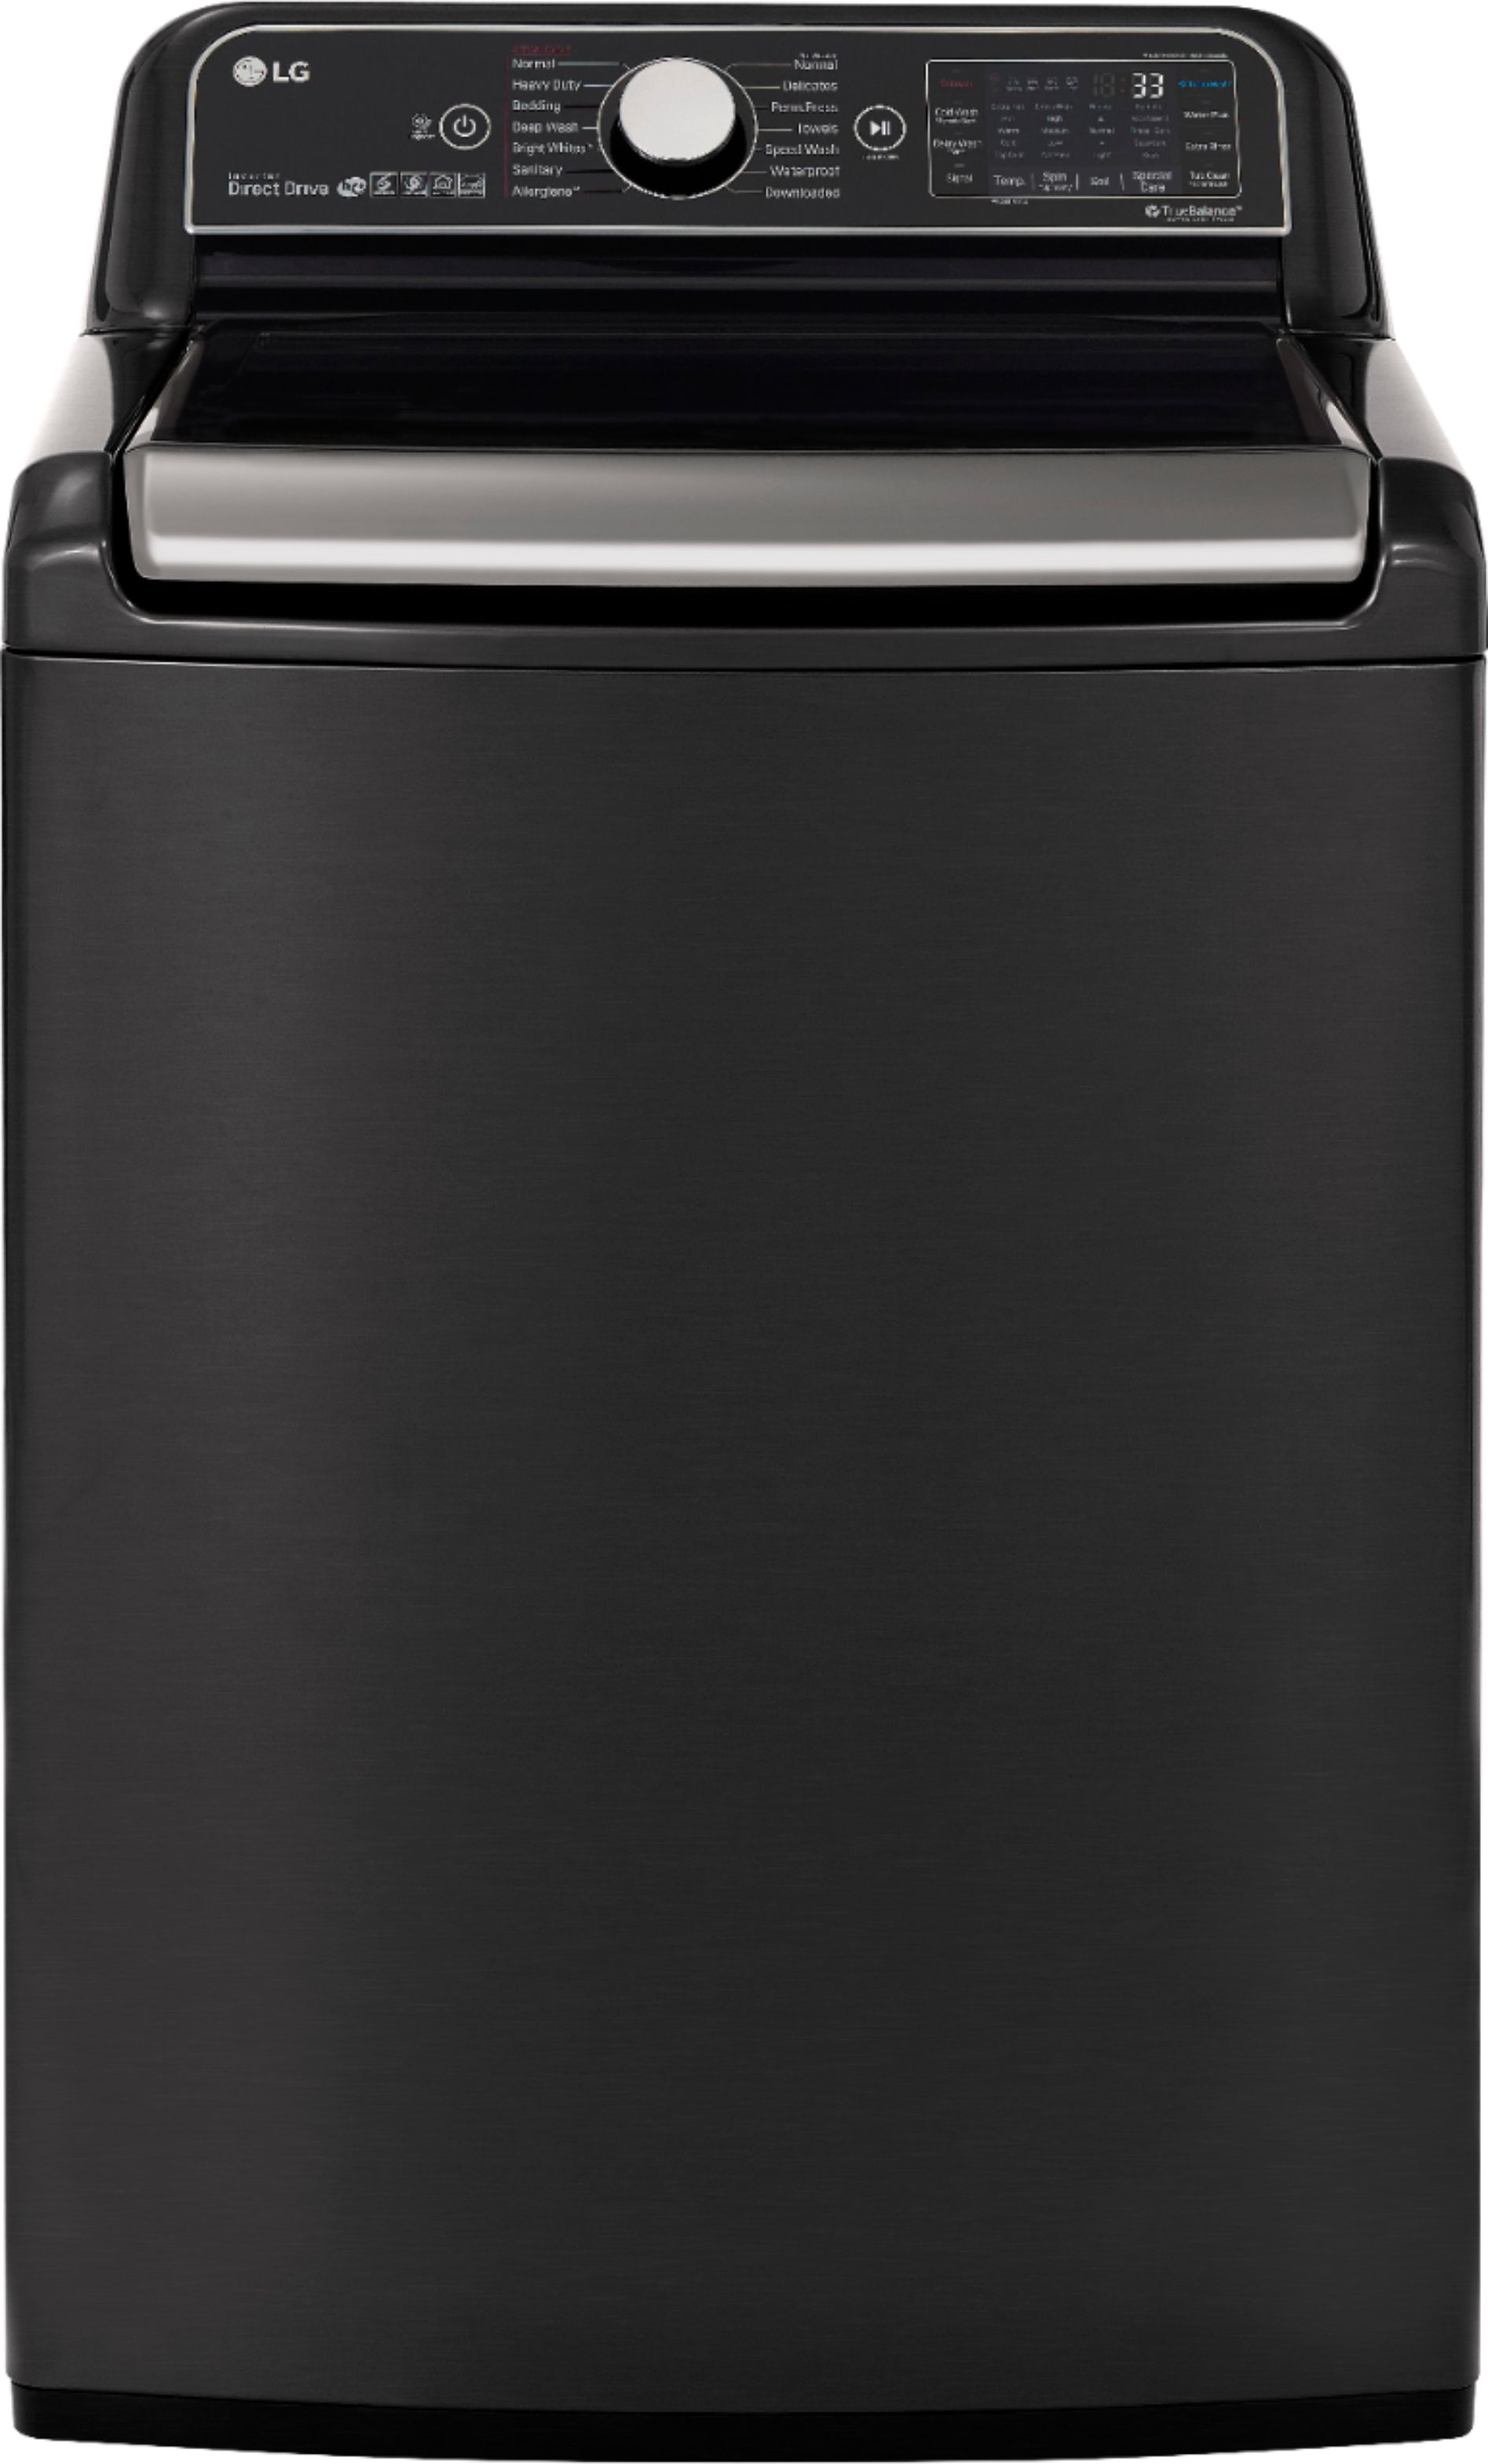 Lg 5 5 Cu Ft 14 Cycle Top Loading Washer With Steam Black Steel Wt7900hba Best Buy